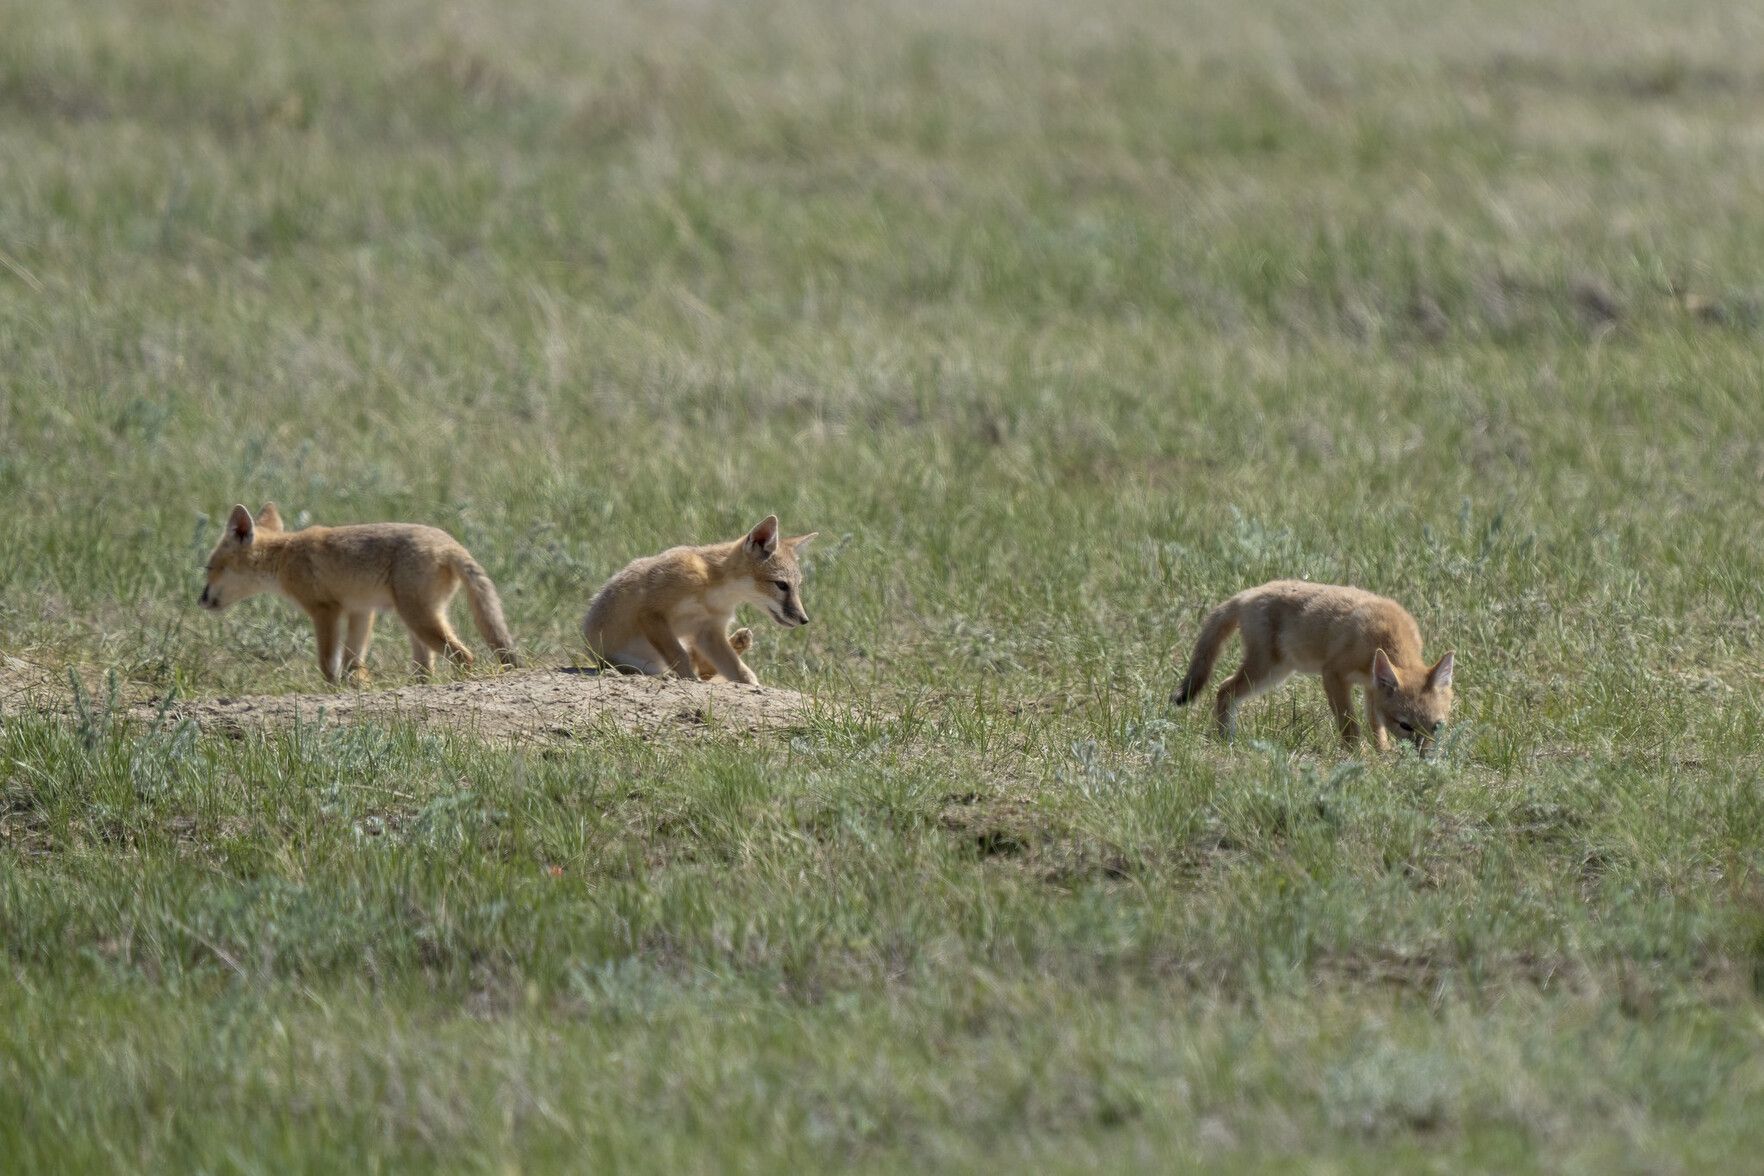 Three swift fox kits playing near their den. The grass looks rather scorched from the sun and it seems to be a hot day.
